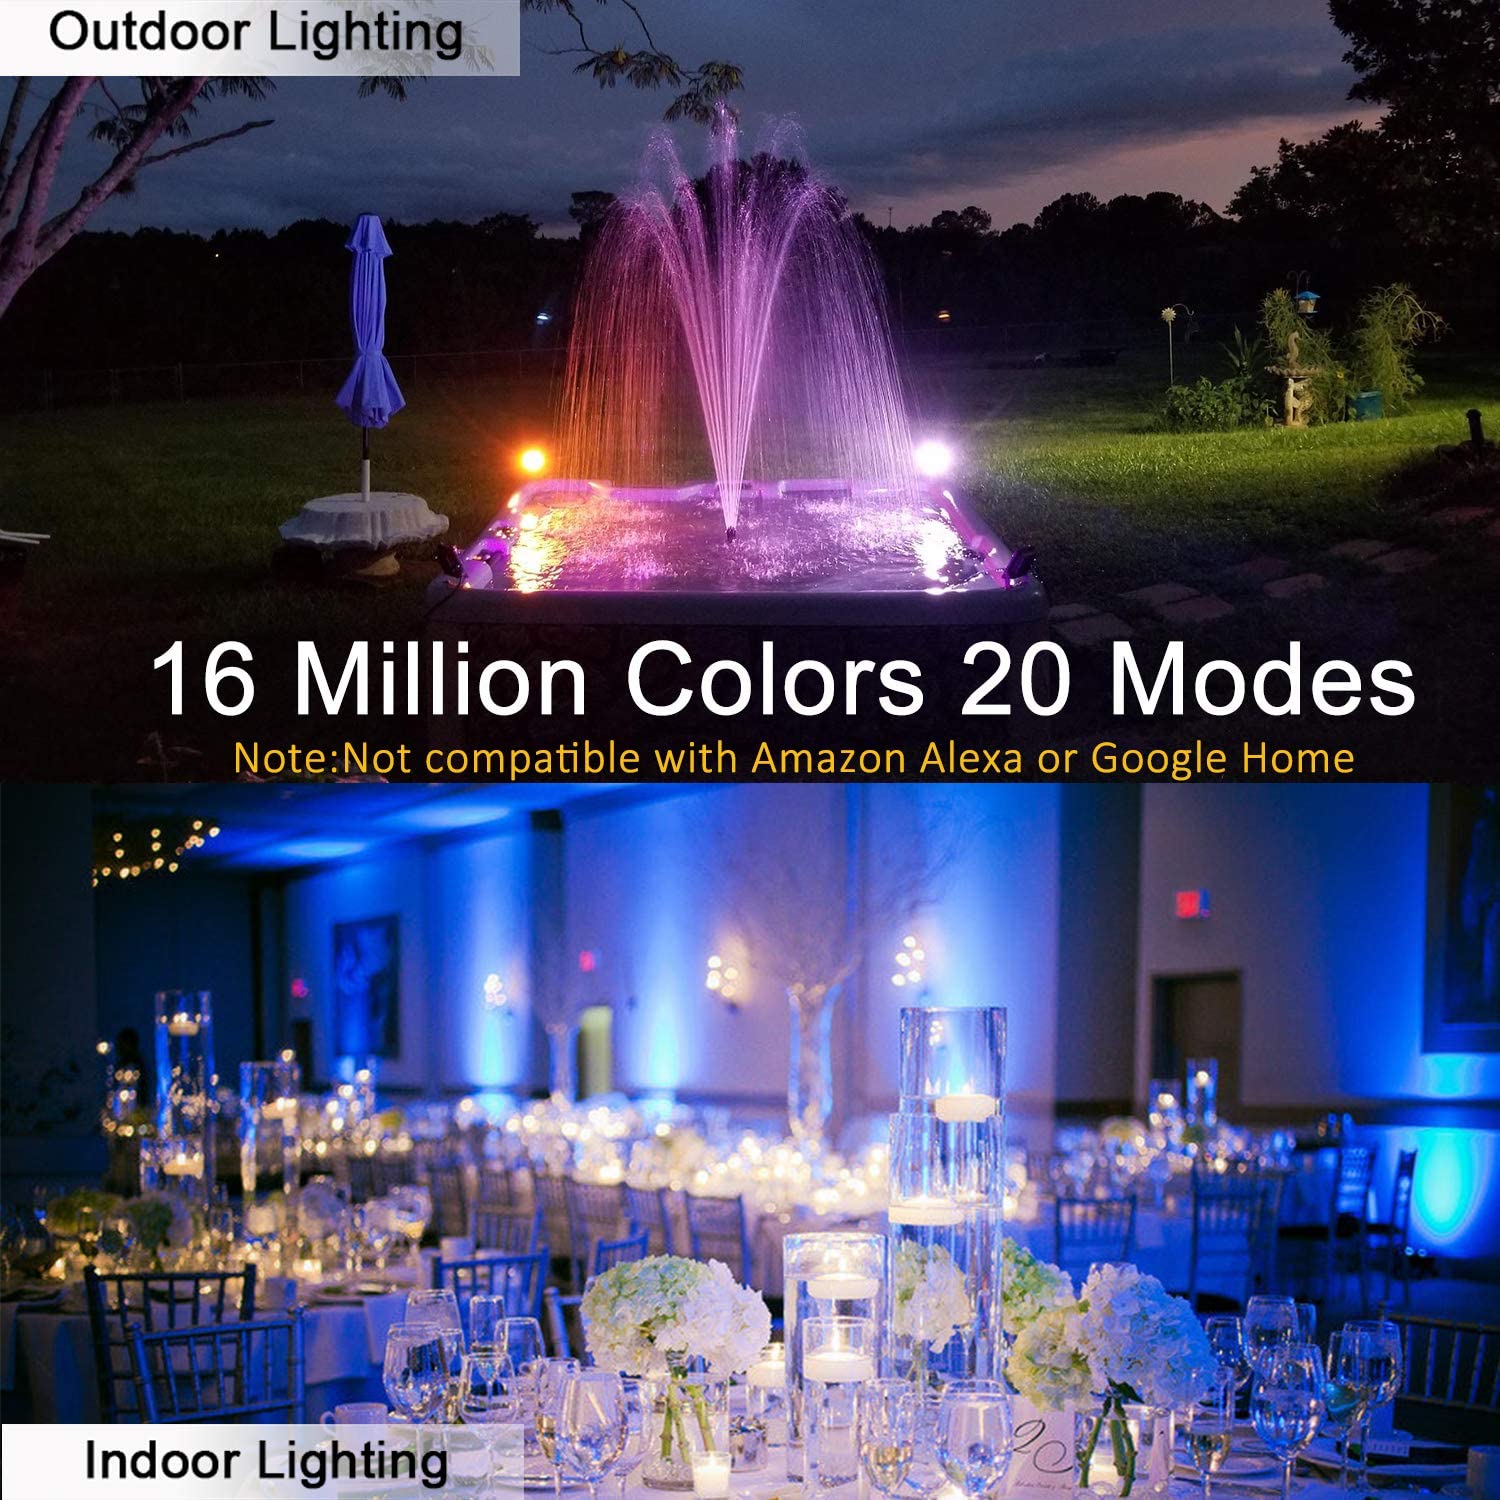 LED Flood Lights RGB Color Changing 100W Equivalent Outdoor, 15W Bluetooth  Smart Floodlights RGB APP Control, IP66 Waterproof, Timing, 2700K16  Million Colors 20 Modes for Garden Stage Lighting Pack